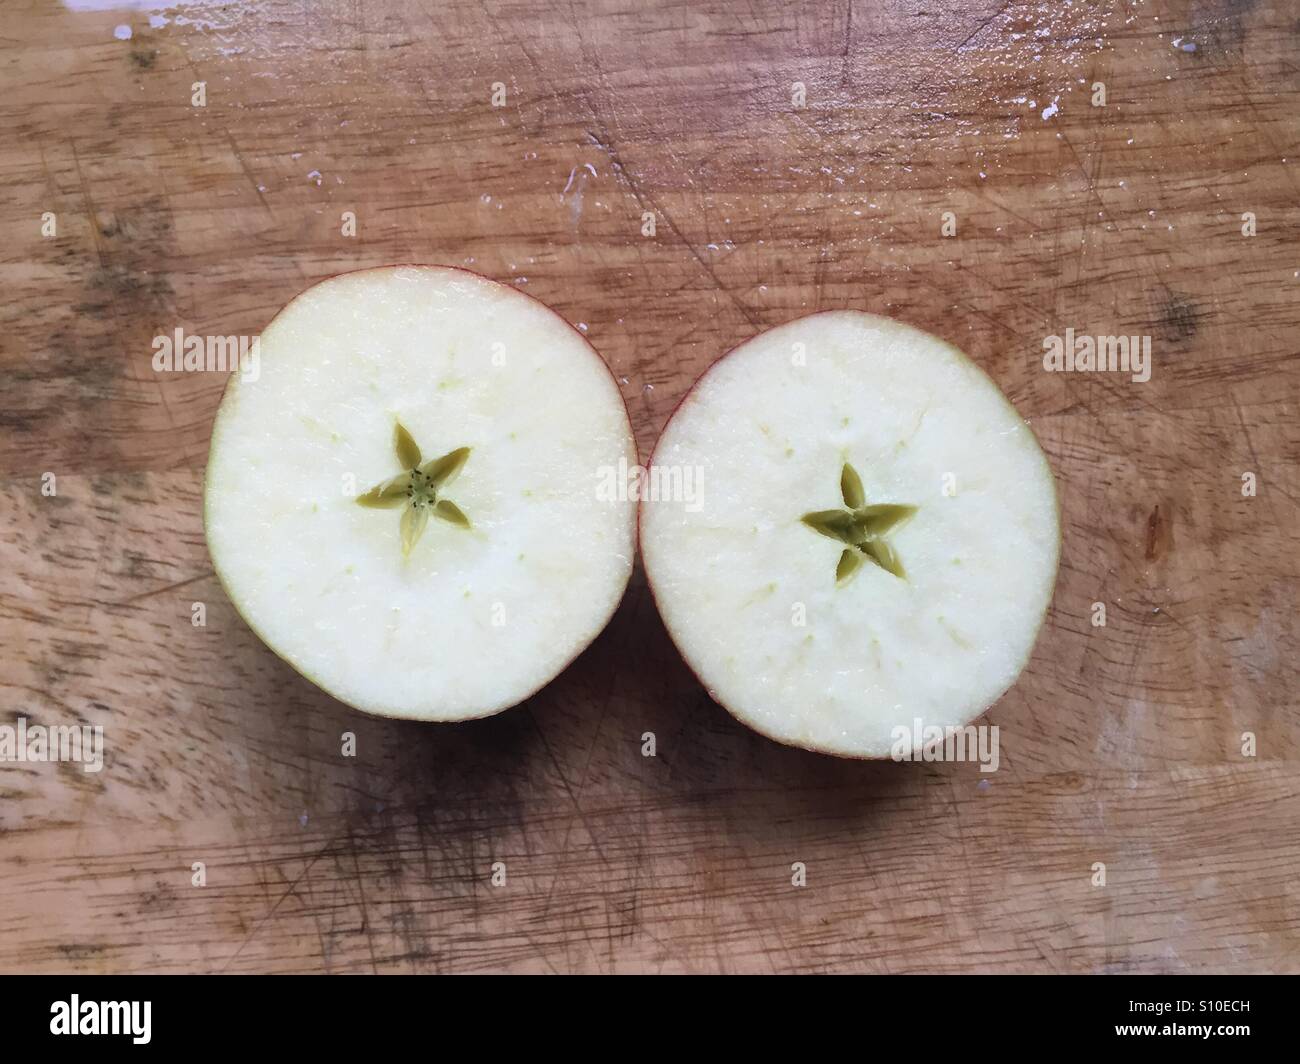 Halved apple showing star Stock Photo